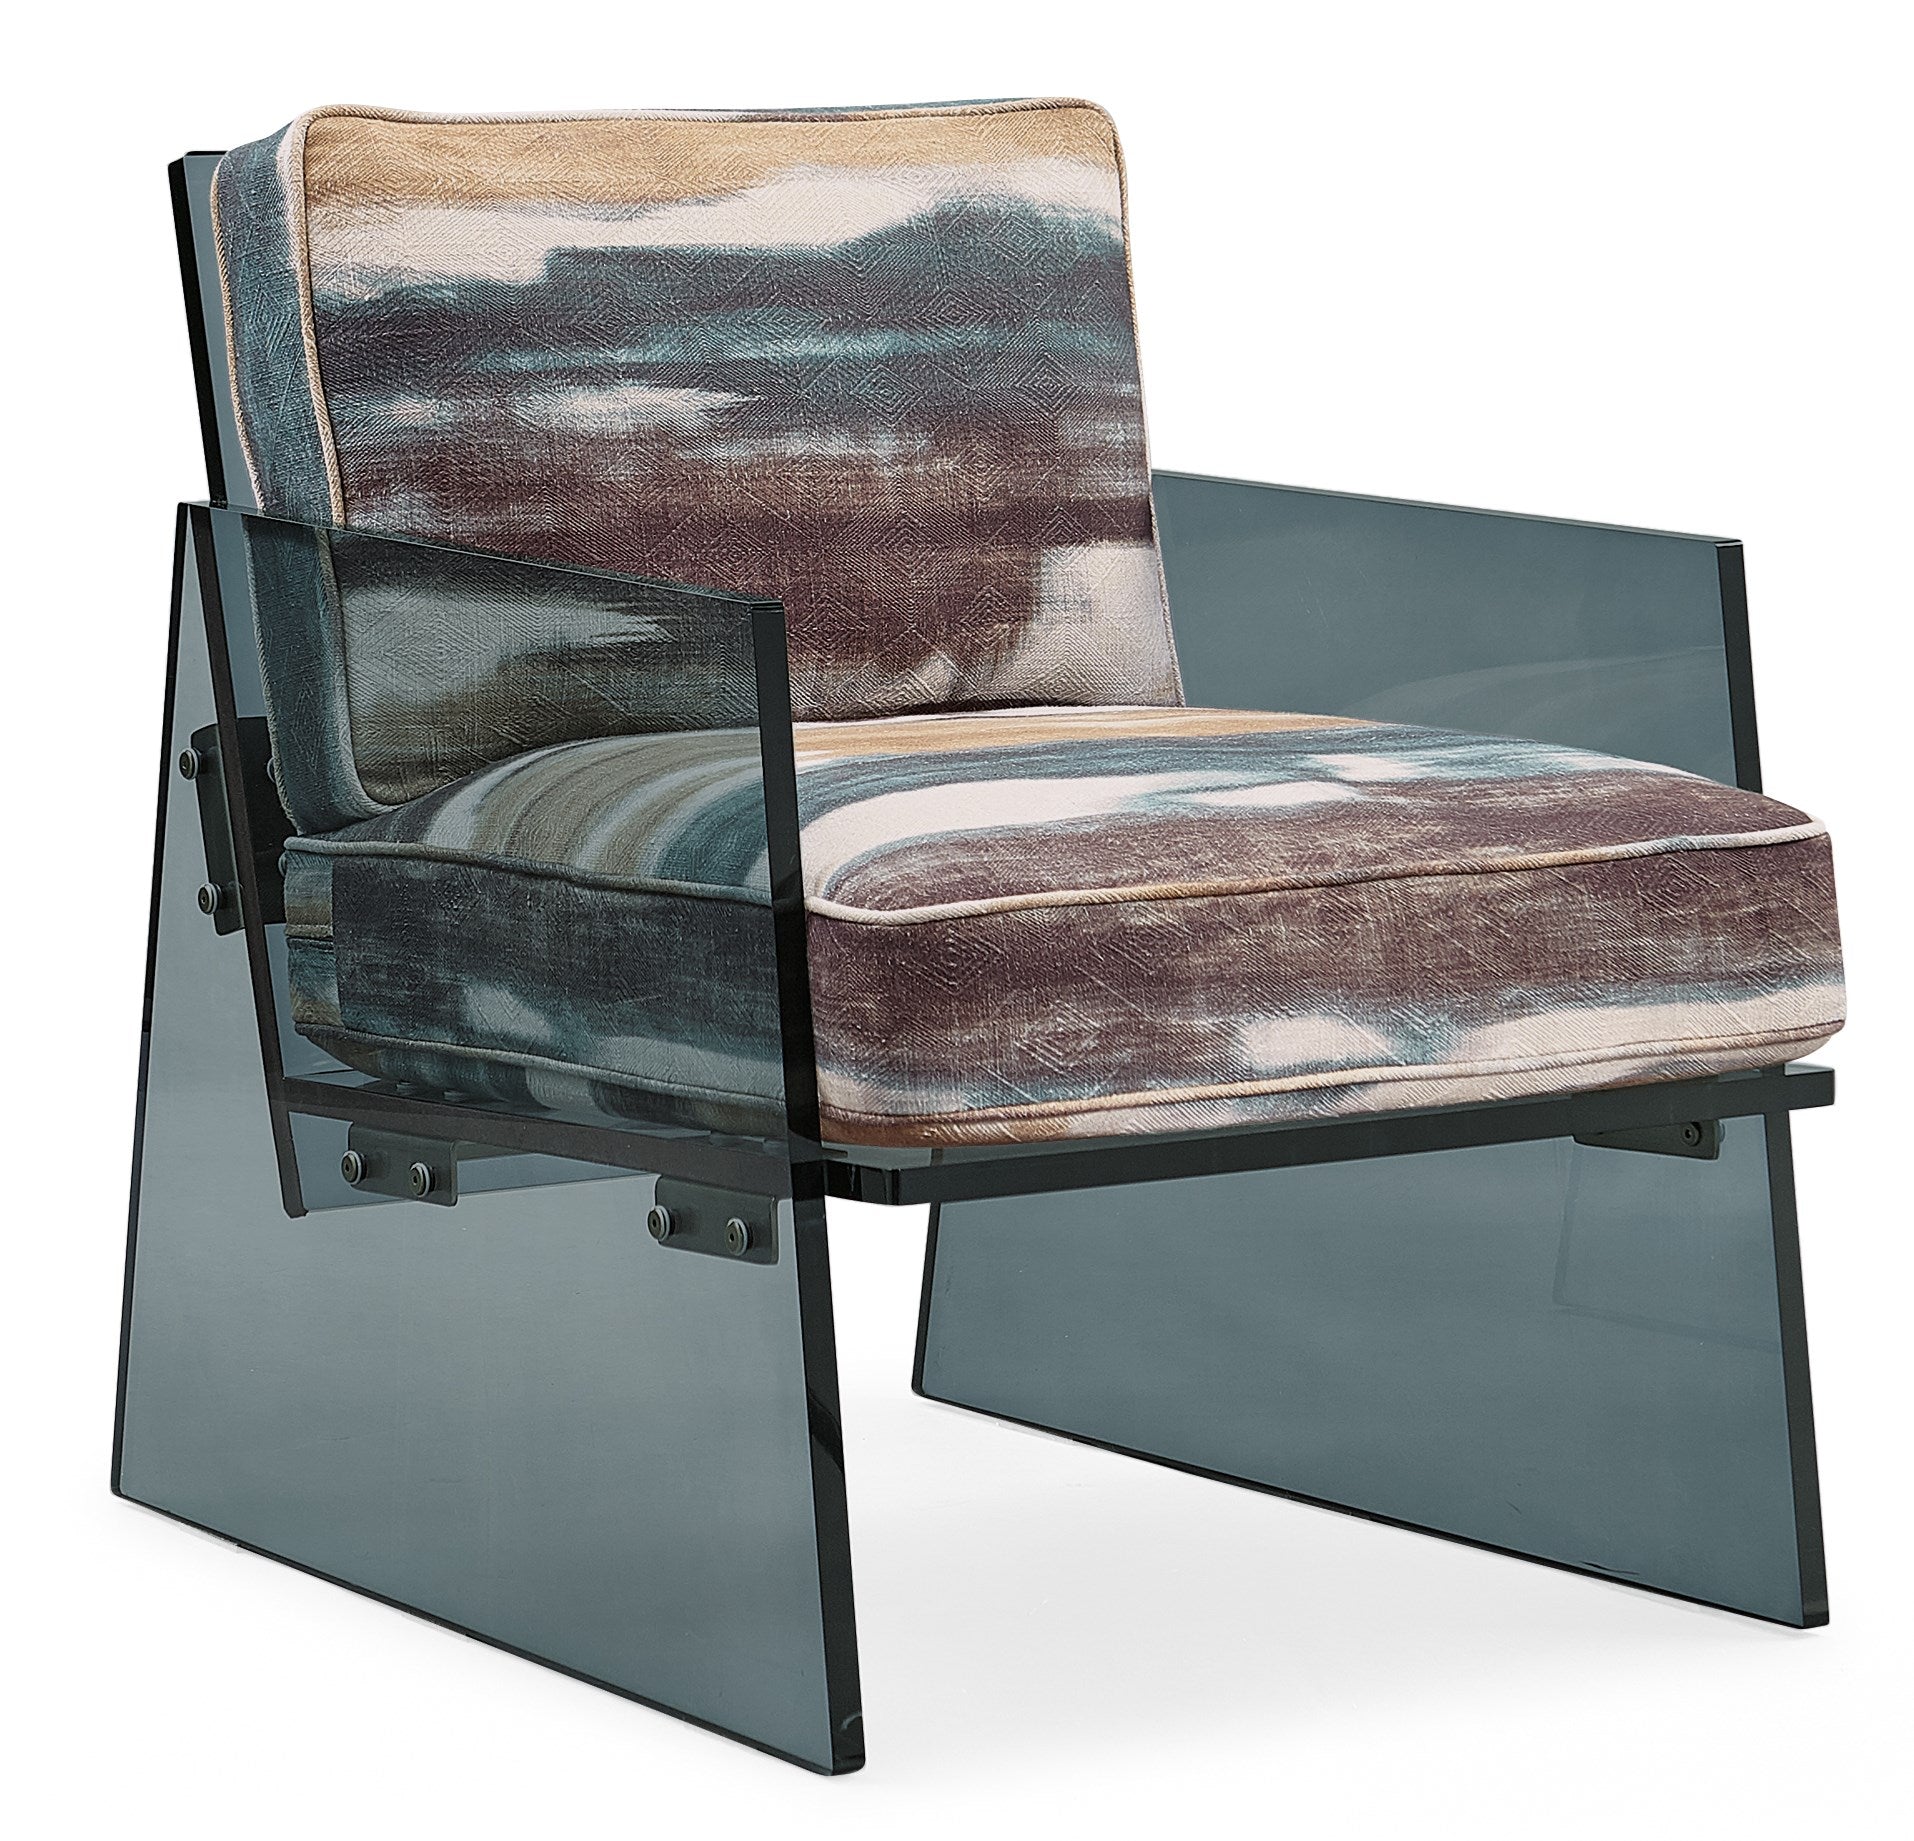 REFLECT Chair